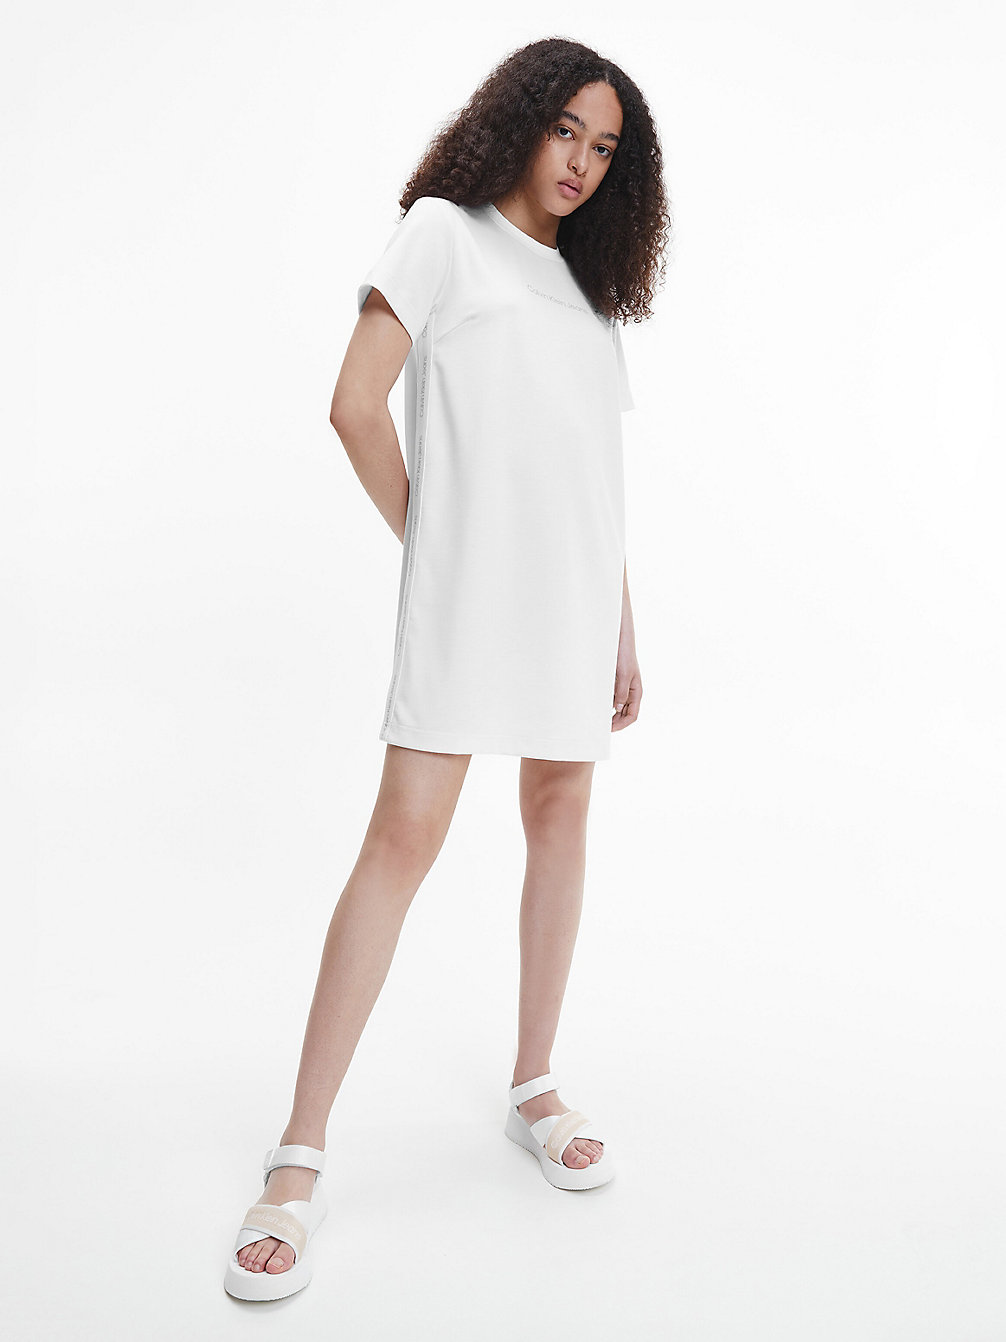 BRIGHT WHITE Recycled Milano Jersey T-Shirt Dress undefined women Calvin Klein